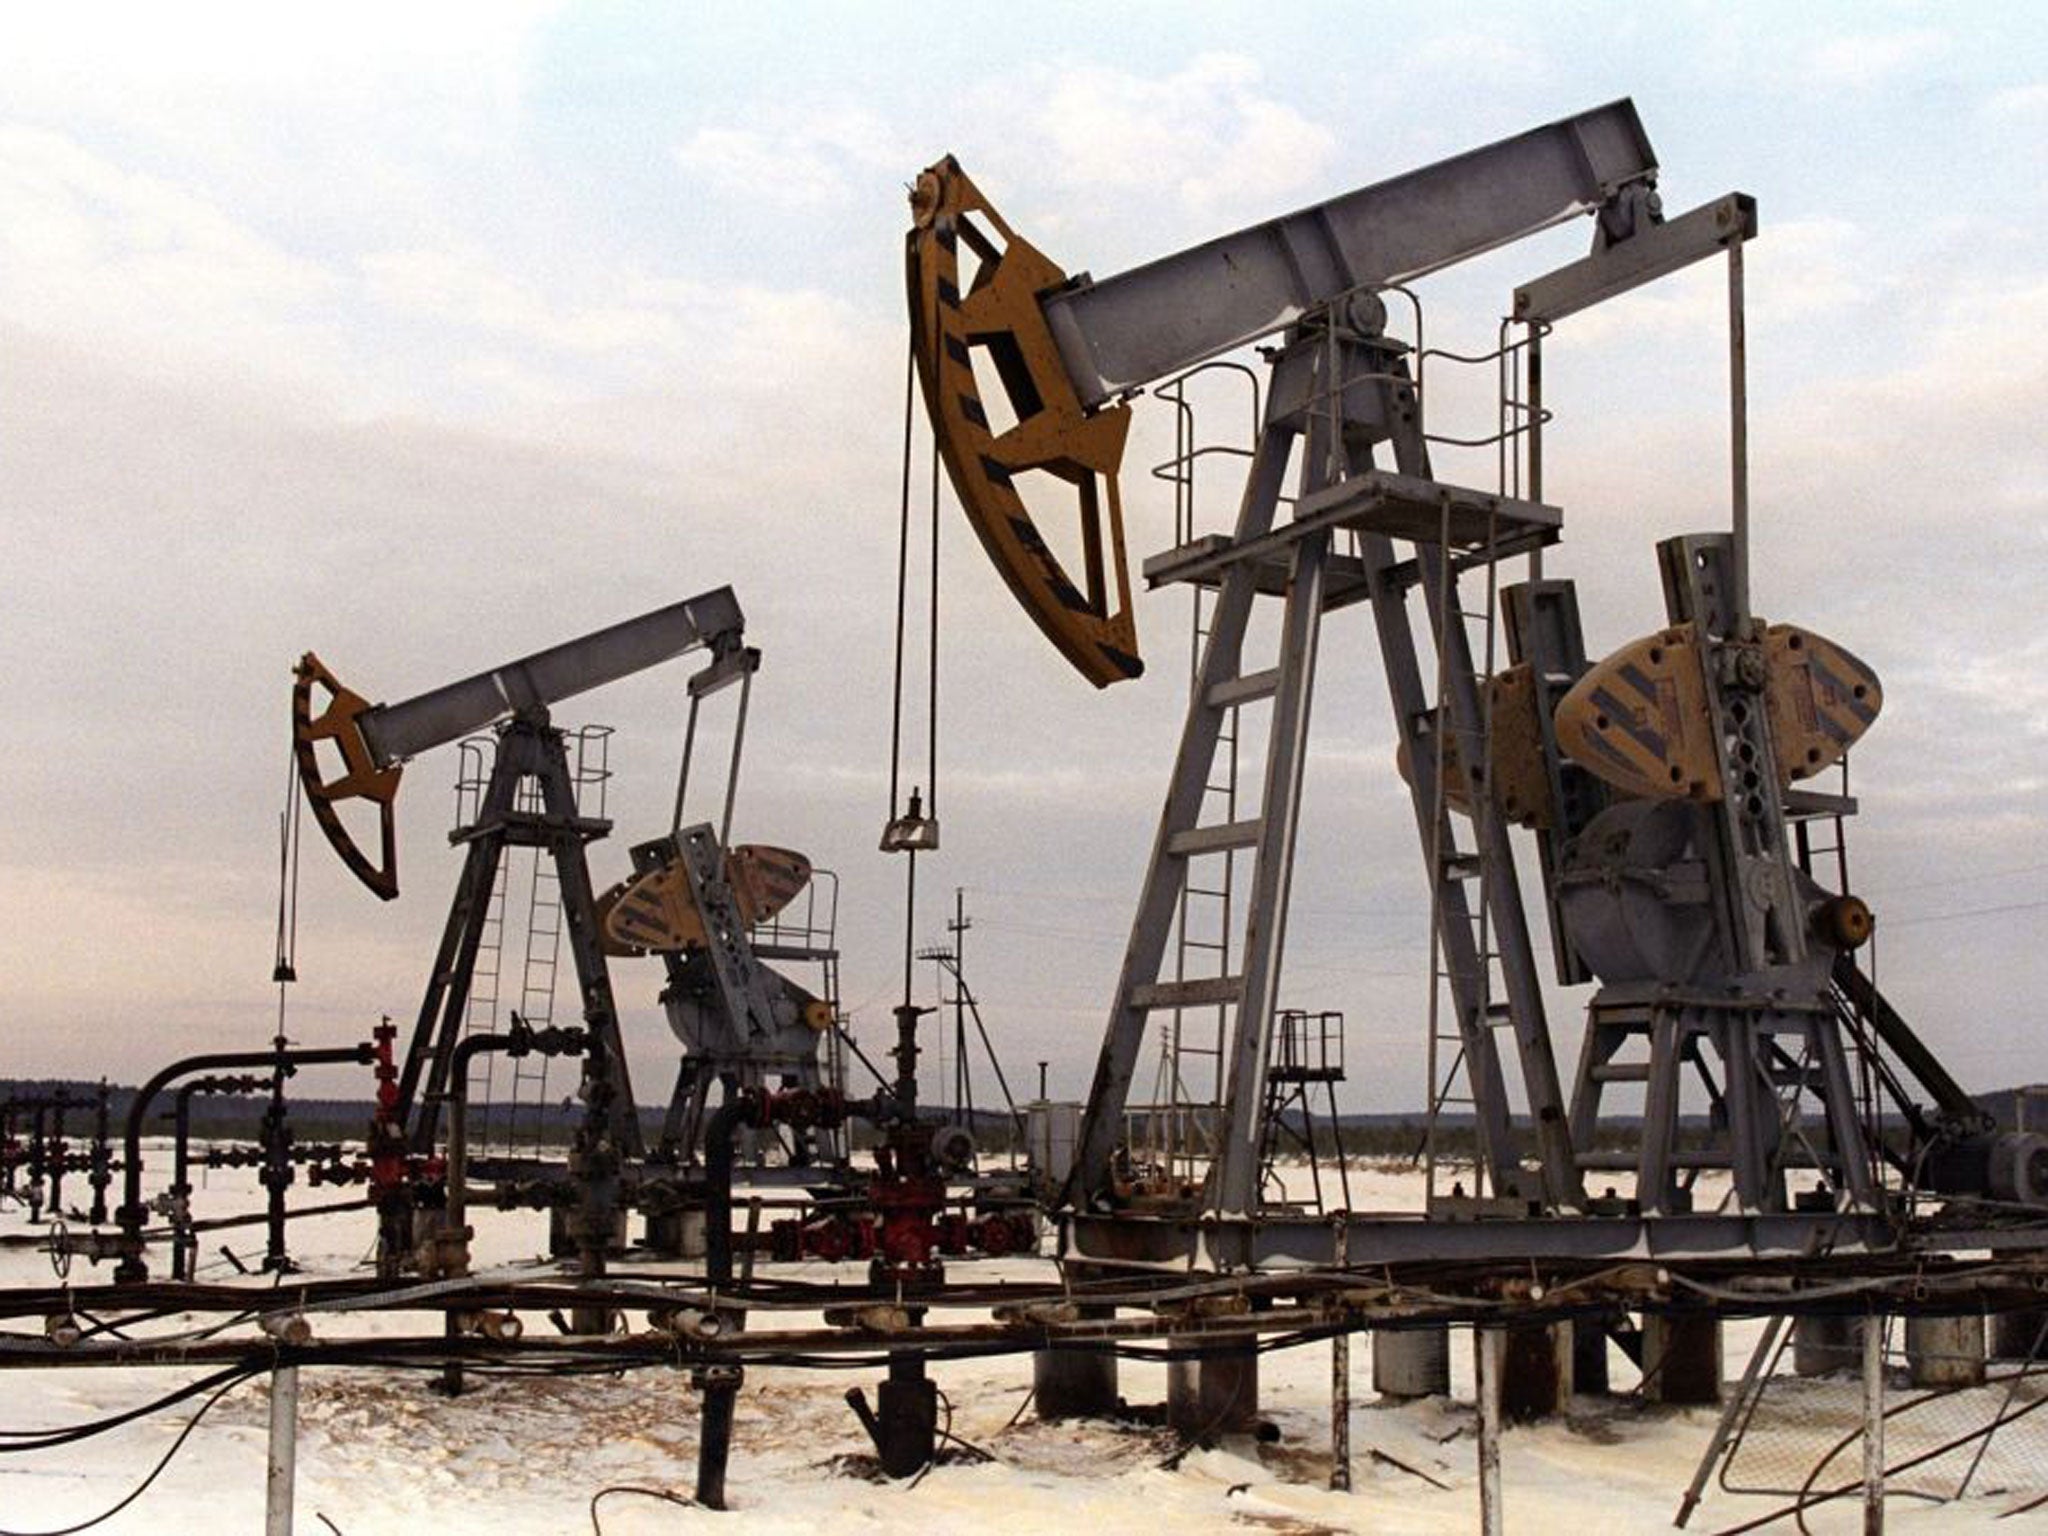 A photo dated 22 November 1992 showing oil-pumping equipment standing abandoned at the oil well site near Surgut in Siberia, Russia